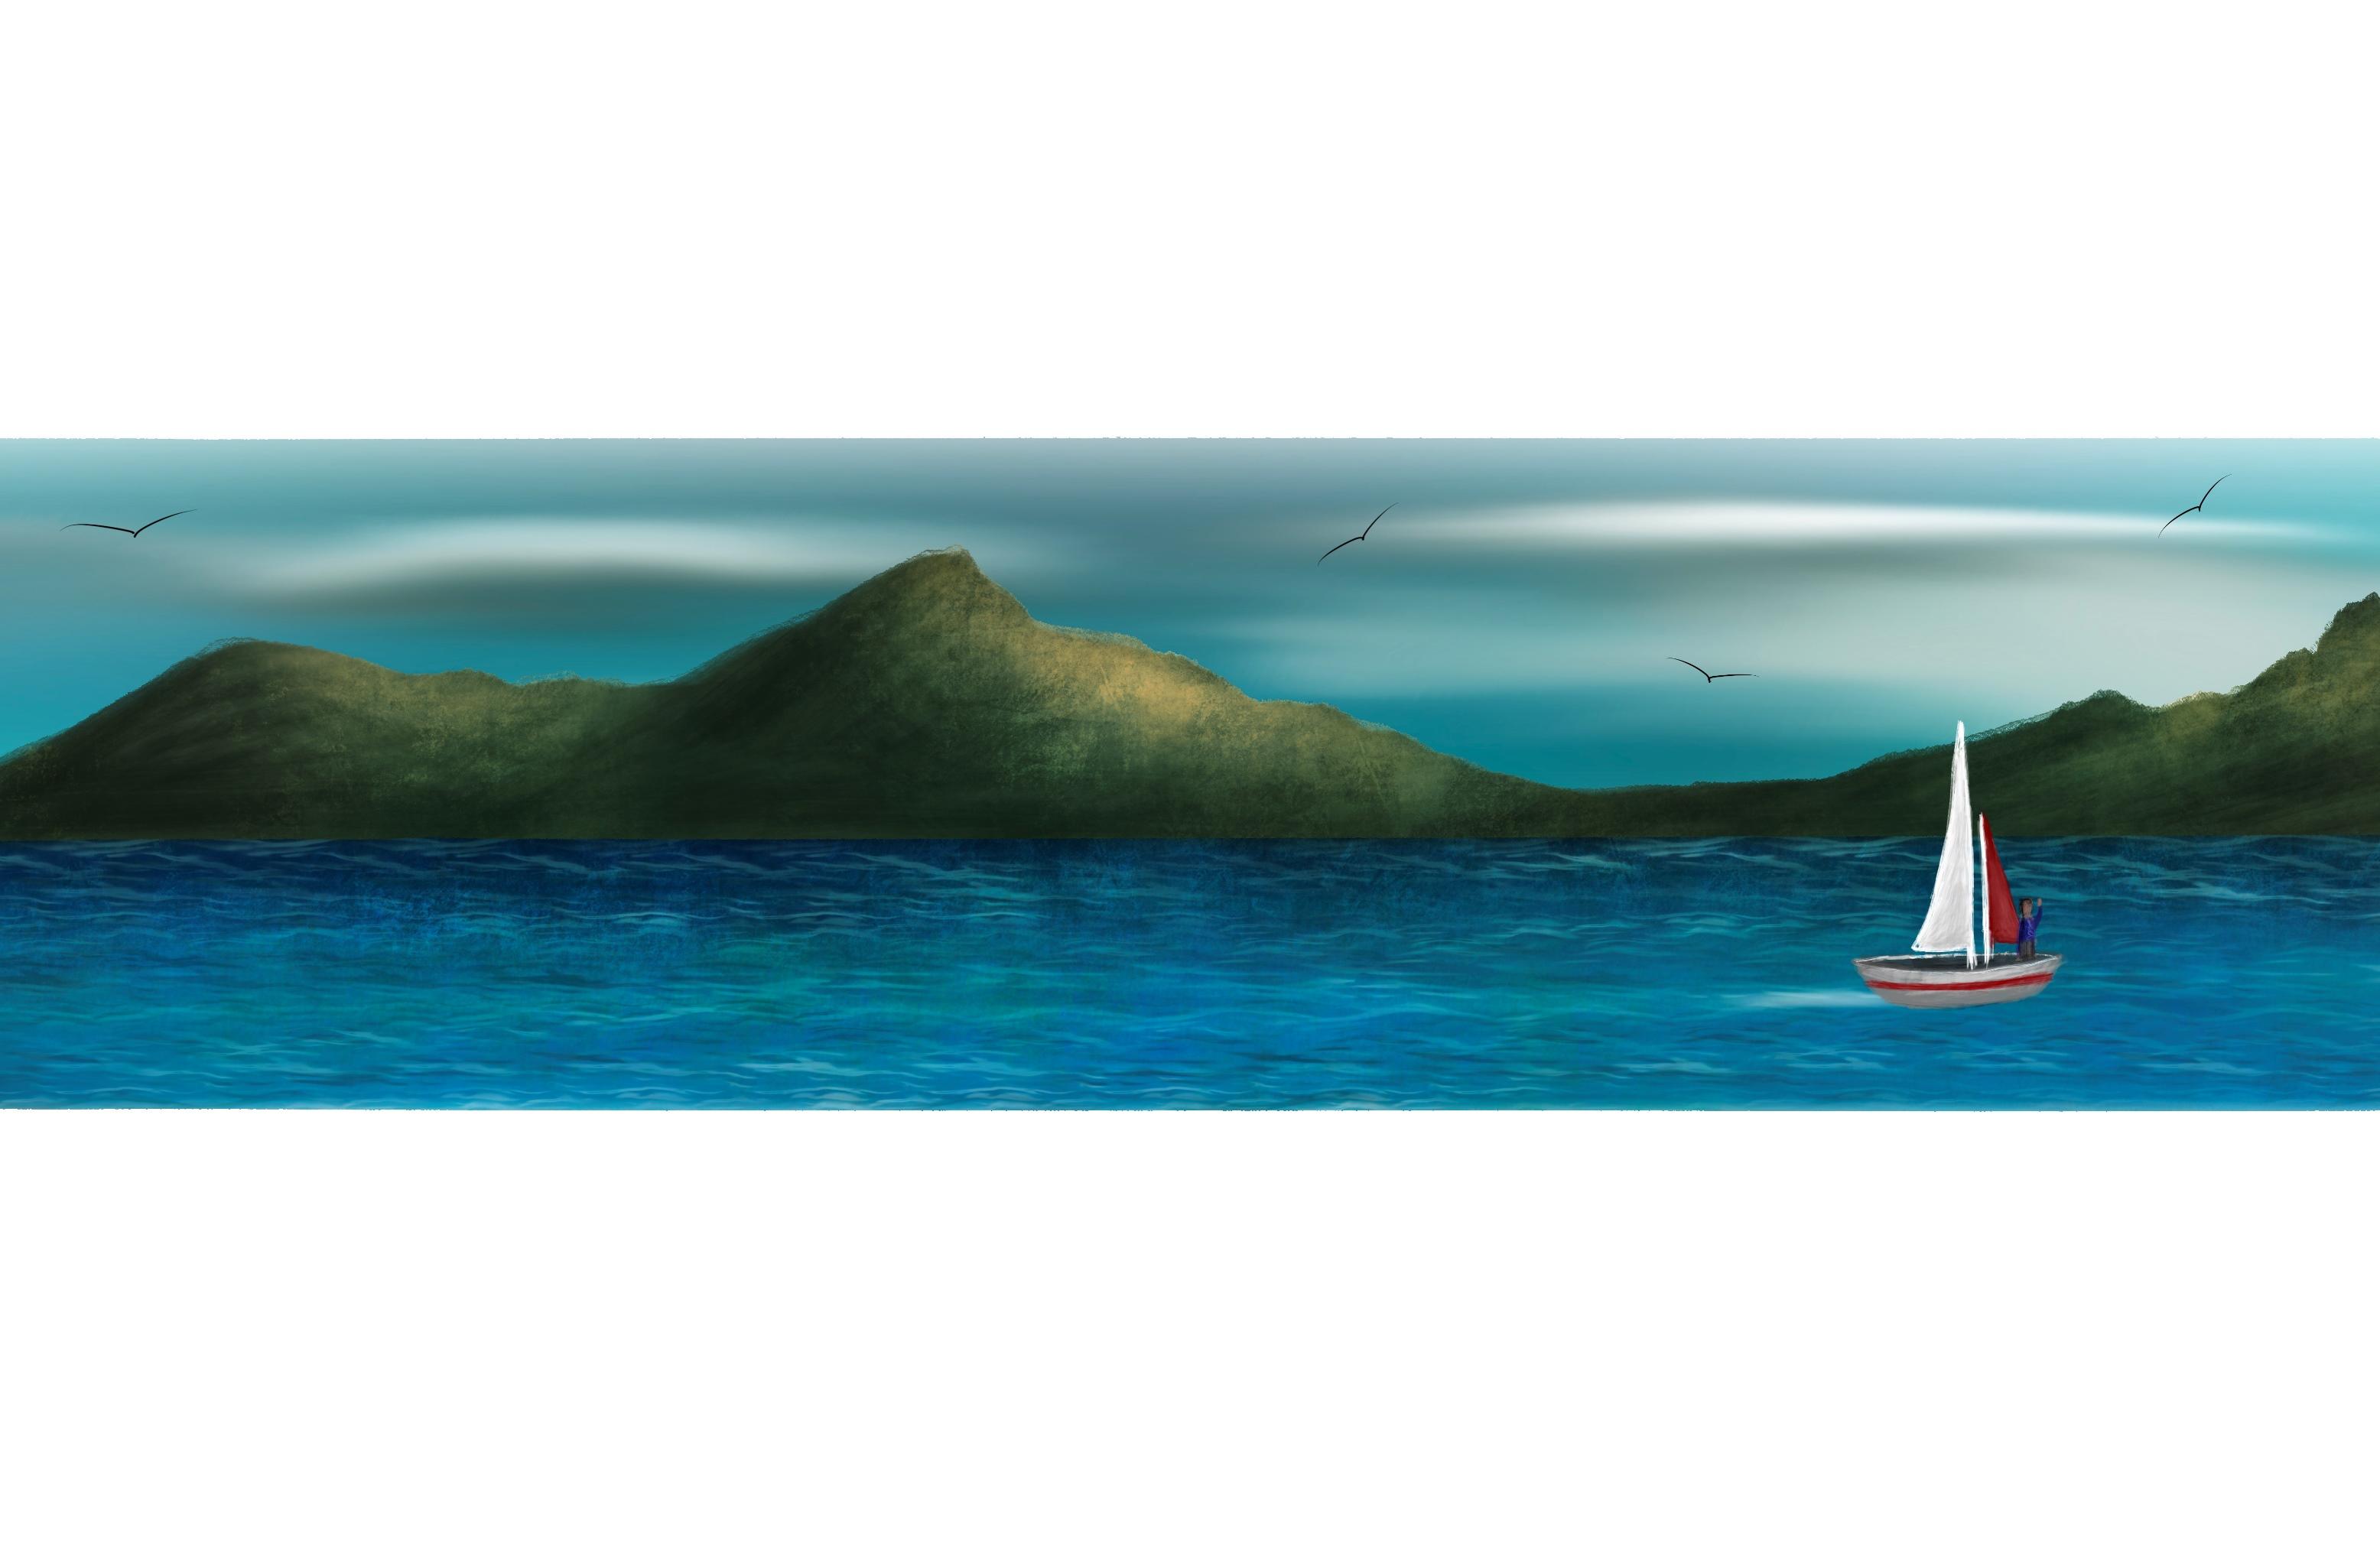 A digital painting by Lily Bourne printed on eco fine art paper titled Just Breath 1.3 showing a landshape view of a sail boat with one person sailing on open water with mountains behinds and birds flying above.